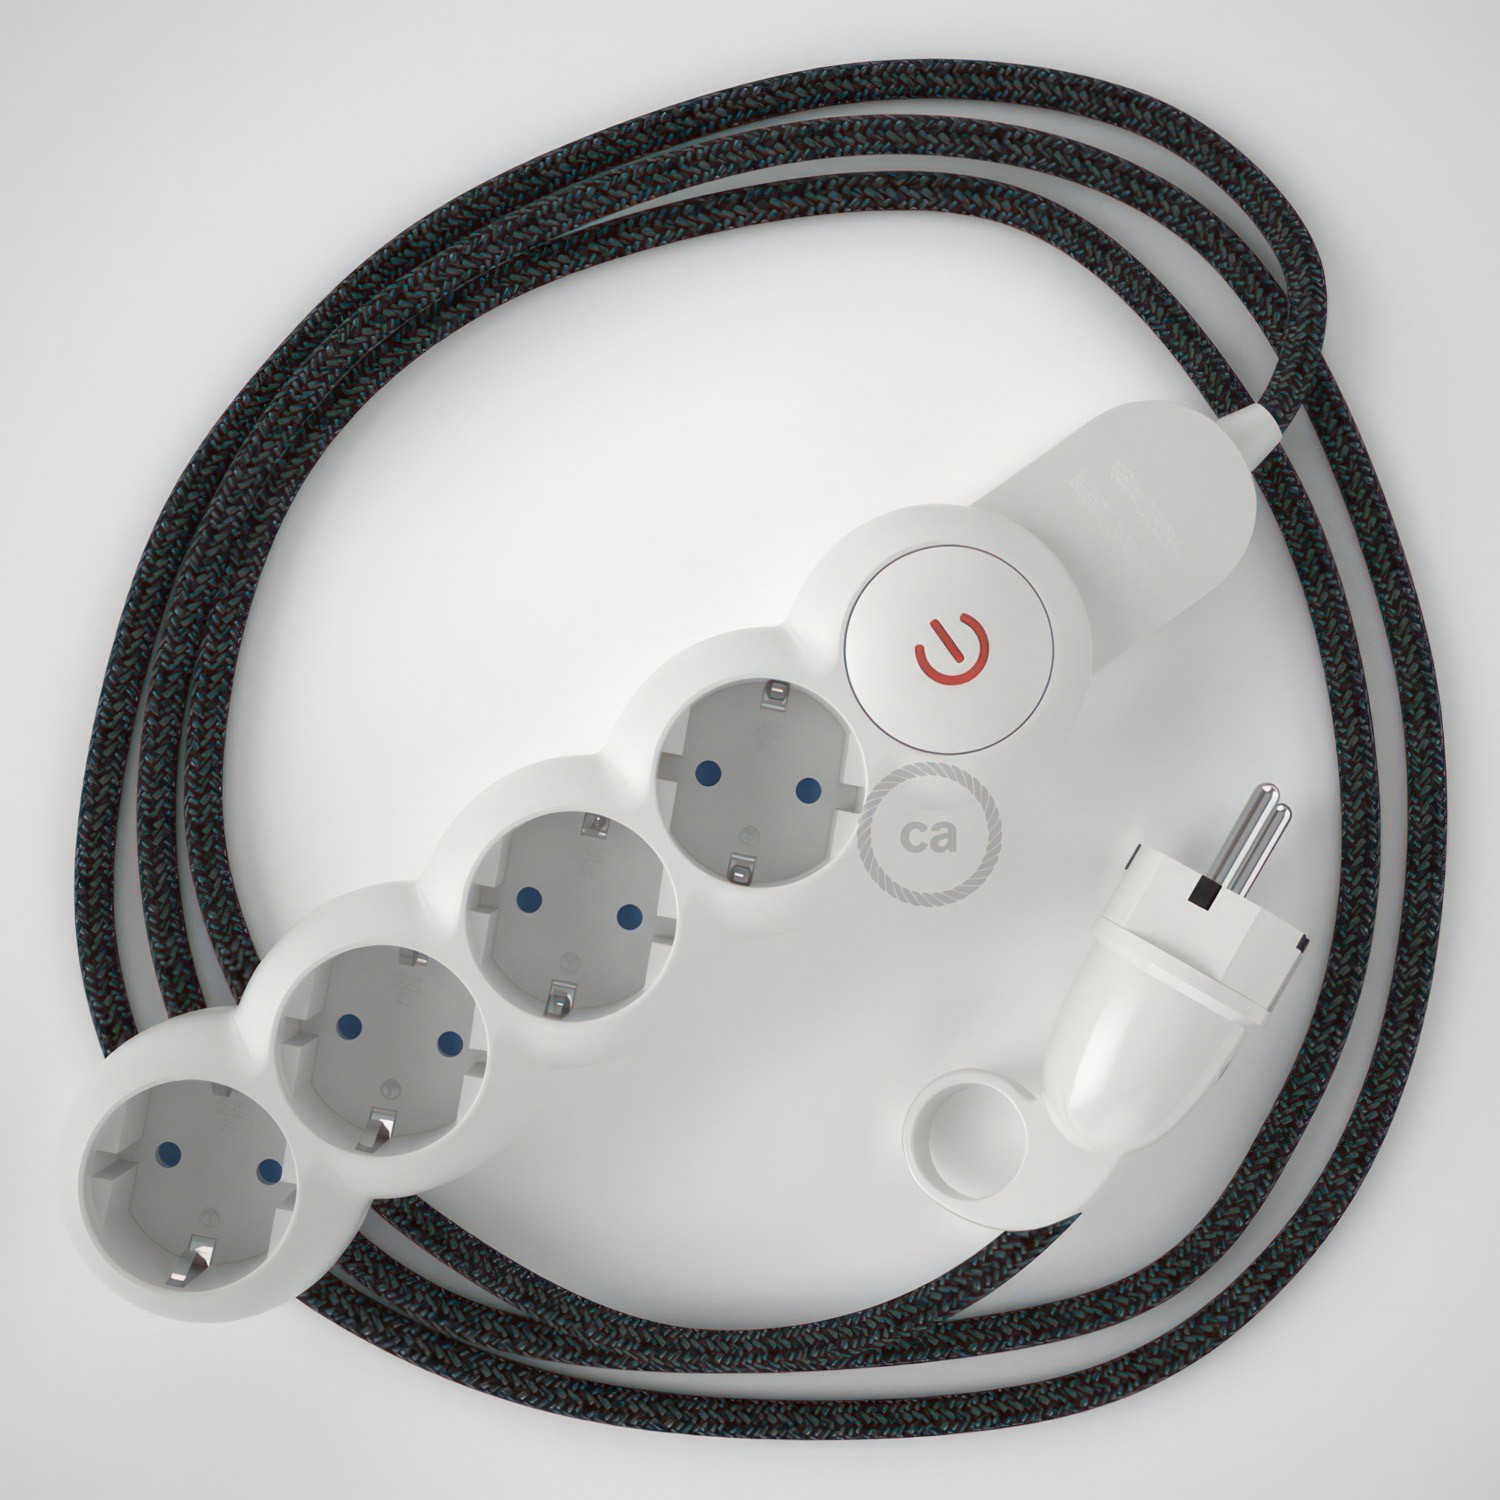 German Power Strip with electrical cable covered in Anthracite Natural Linen fabric RN03 and Schuko plug with confort ring